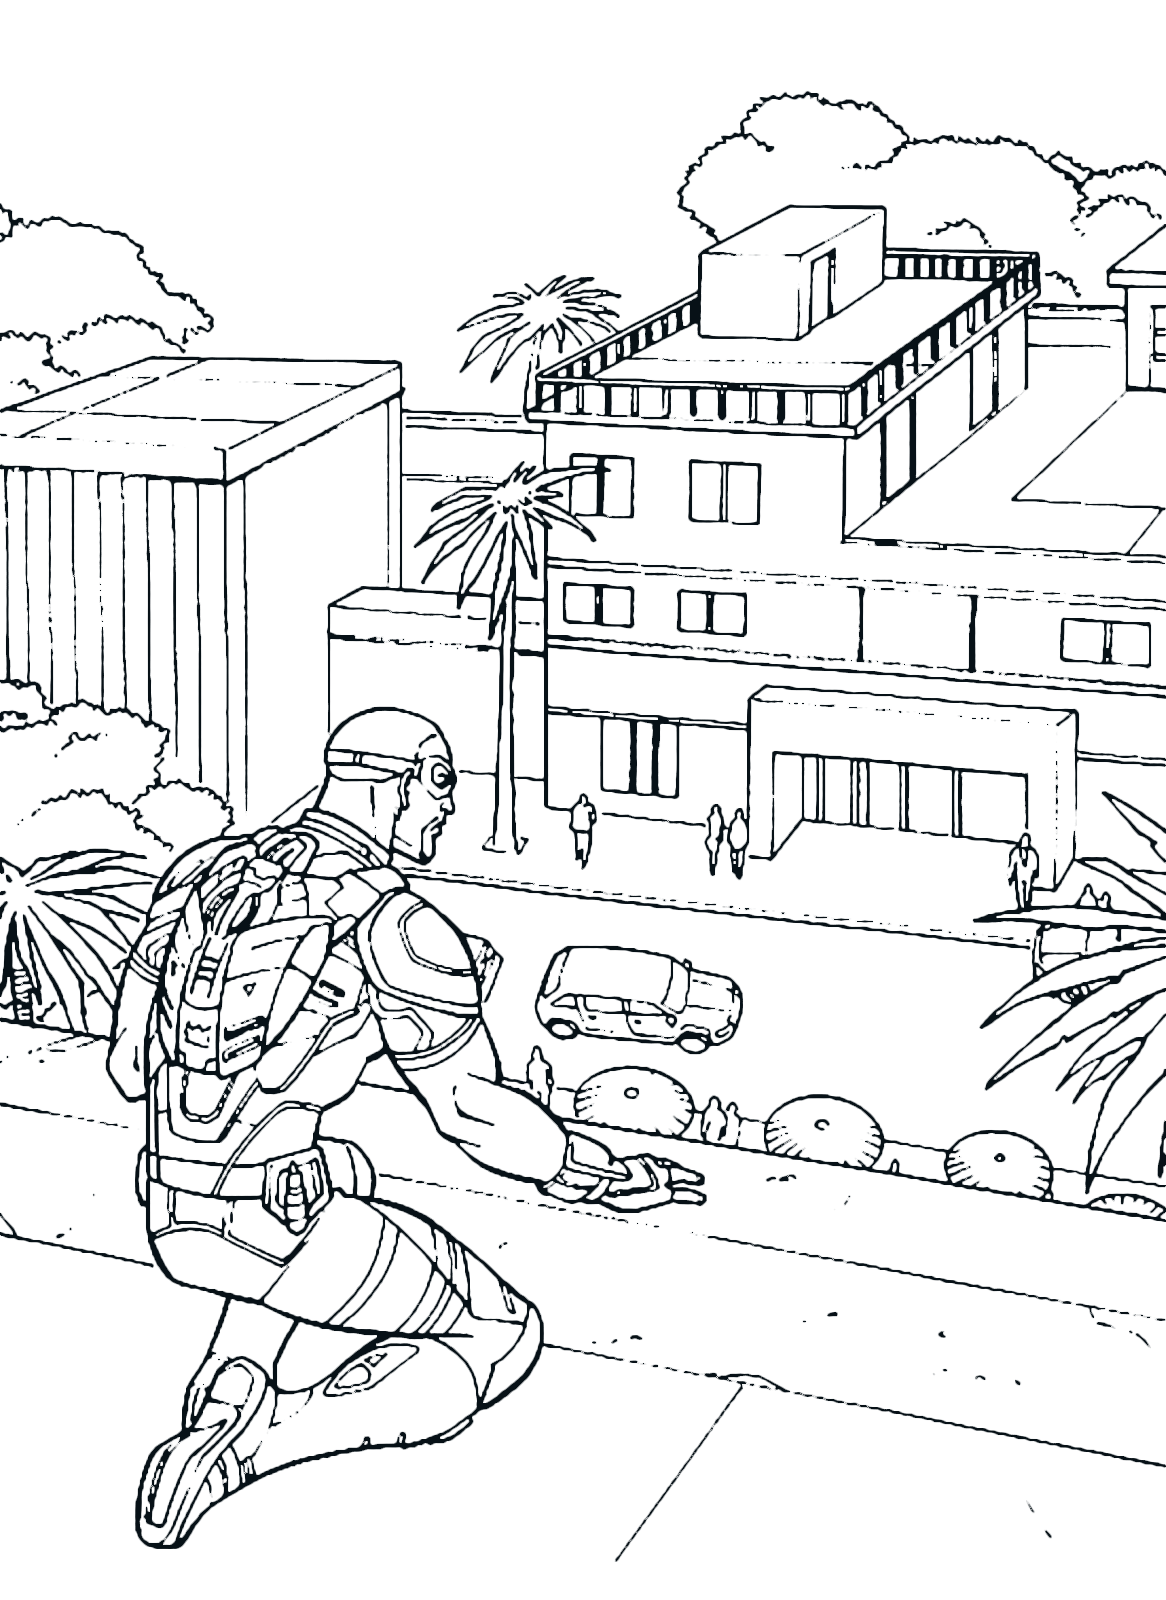 Captain America - Falcon controls the road from the roof of a building